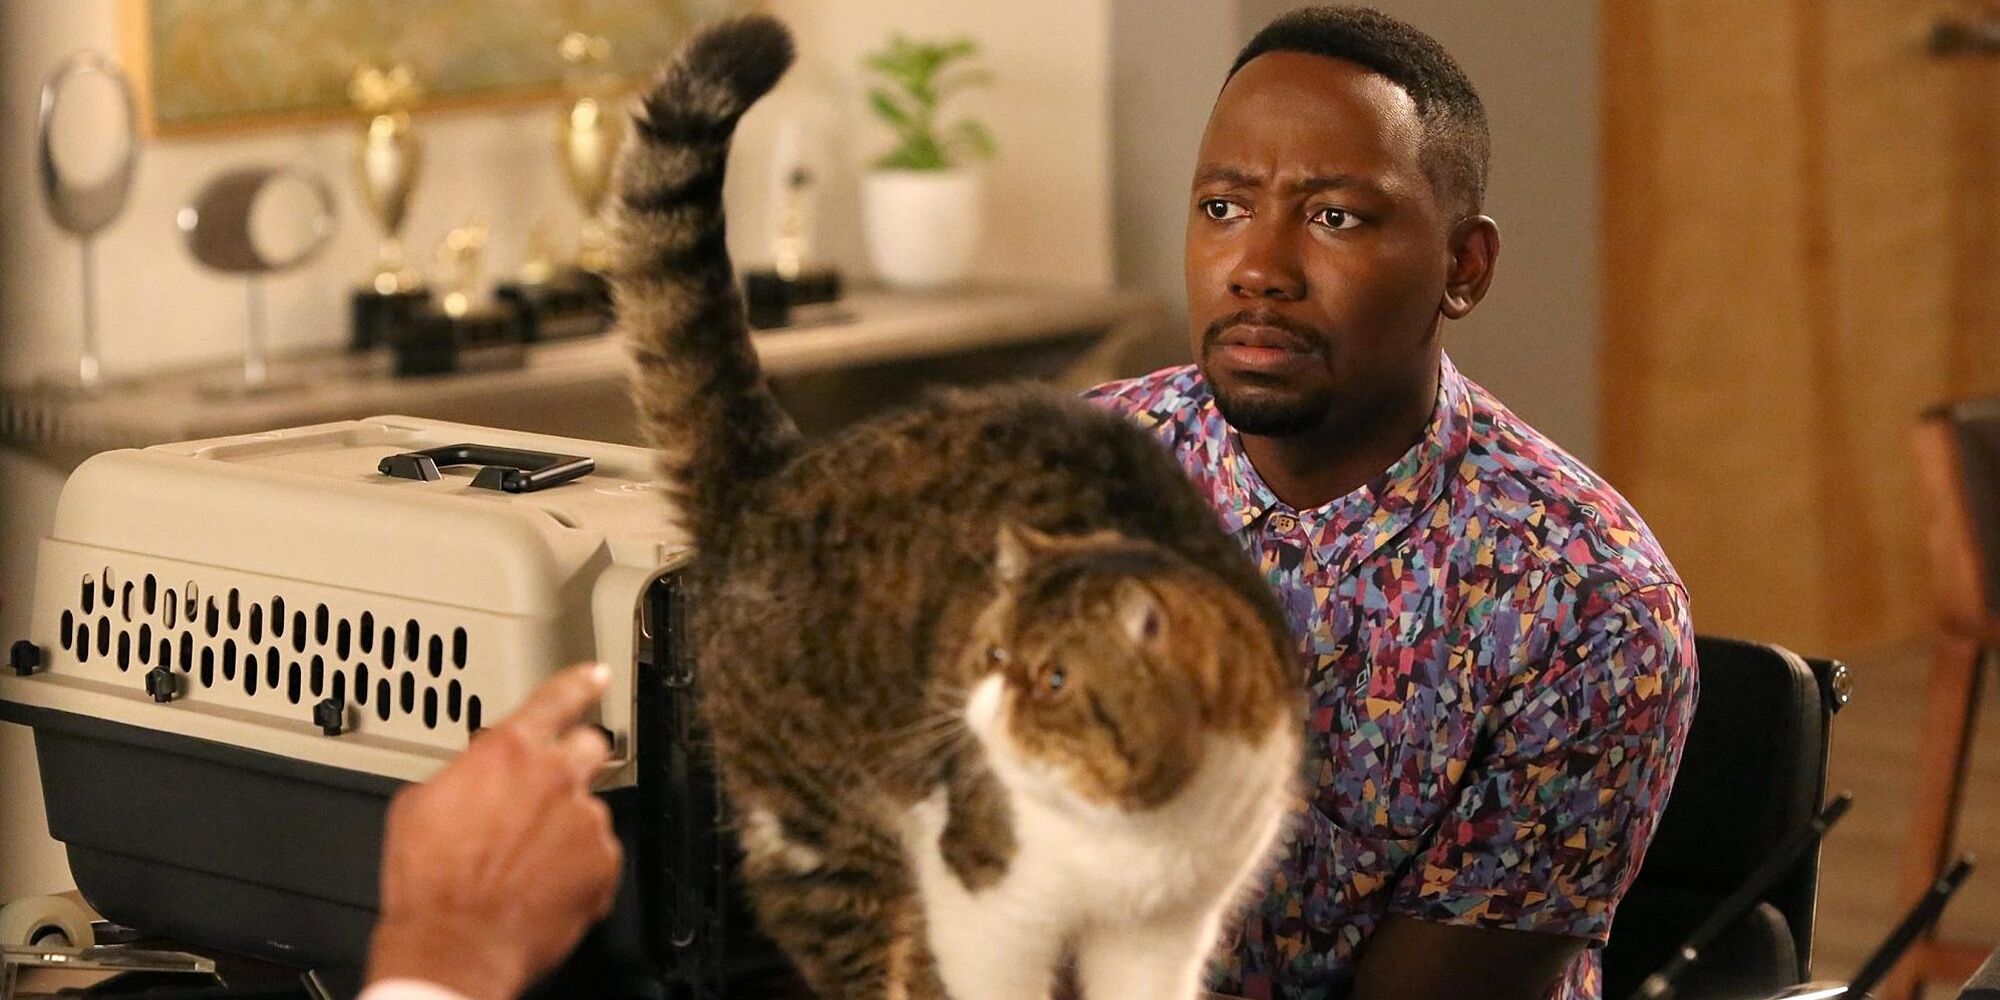 Winston and Furguson together in New Girl